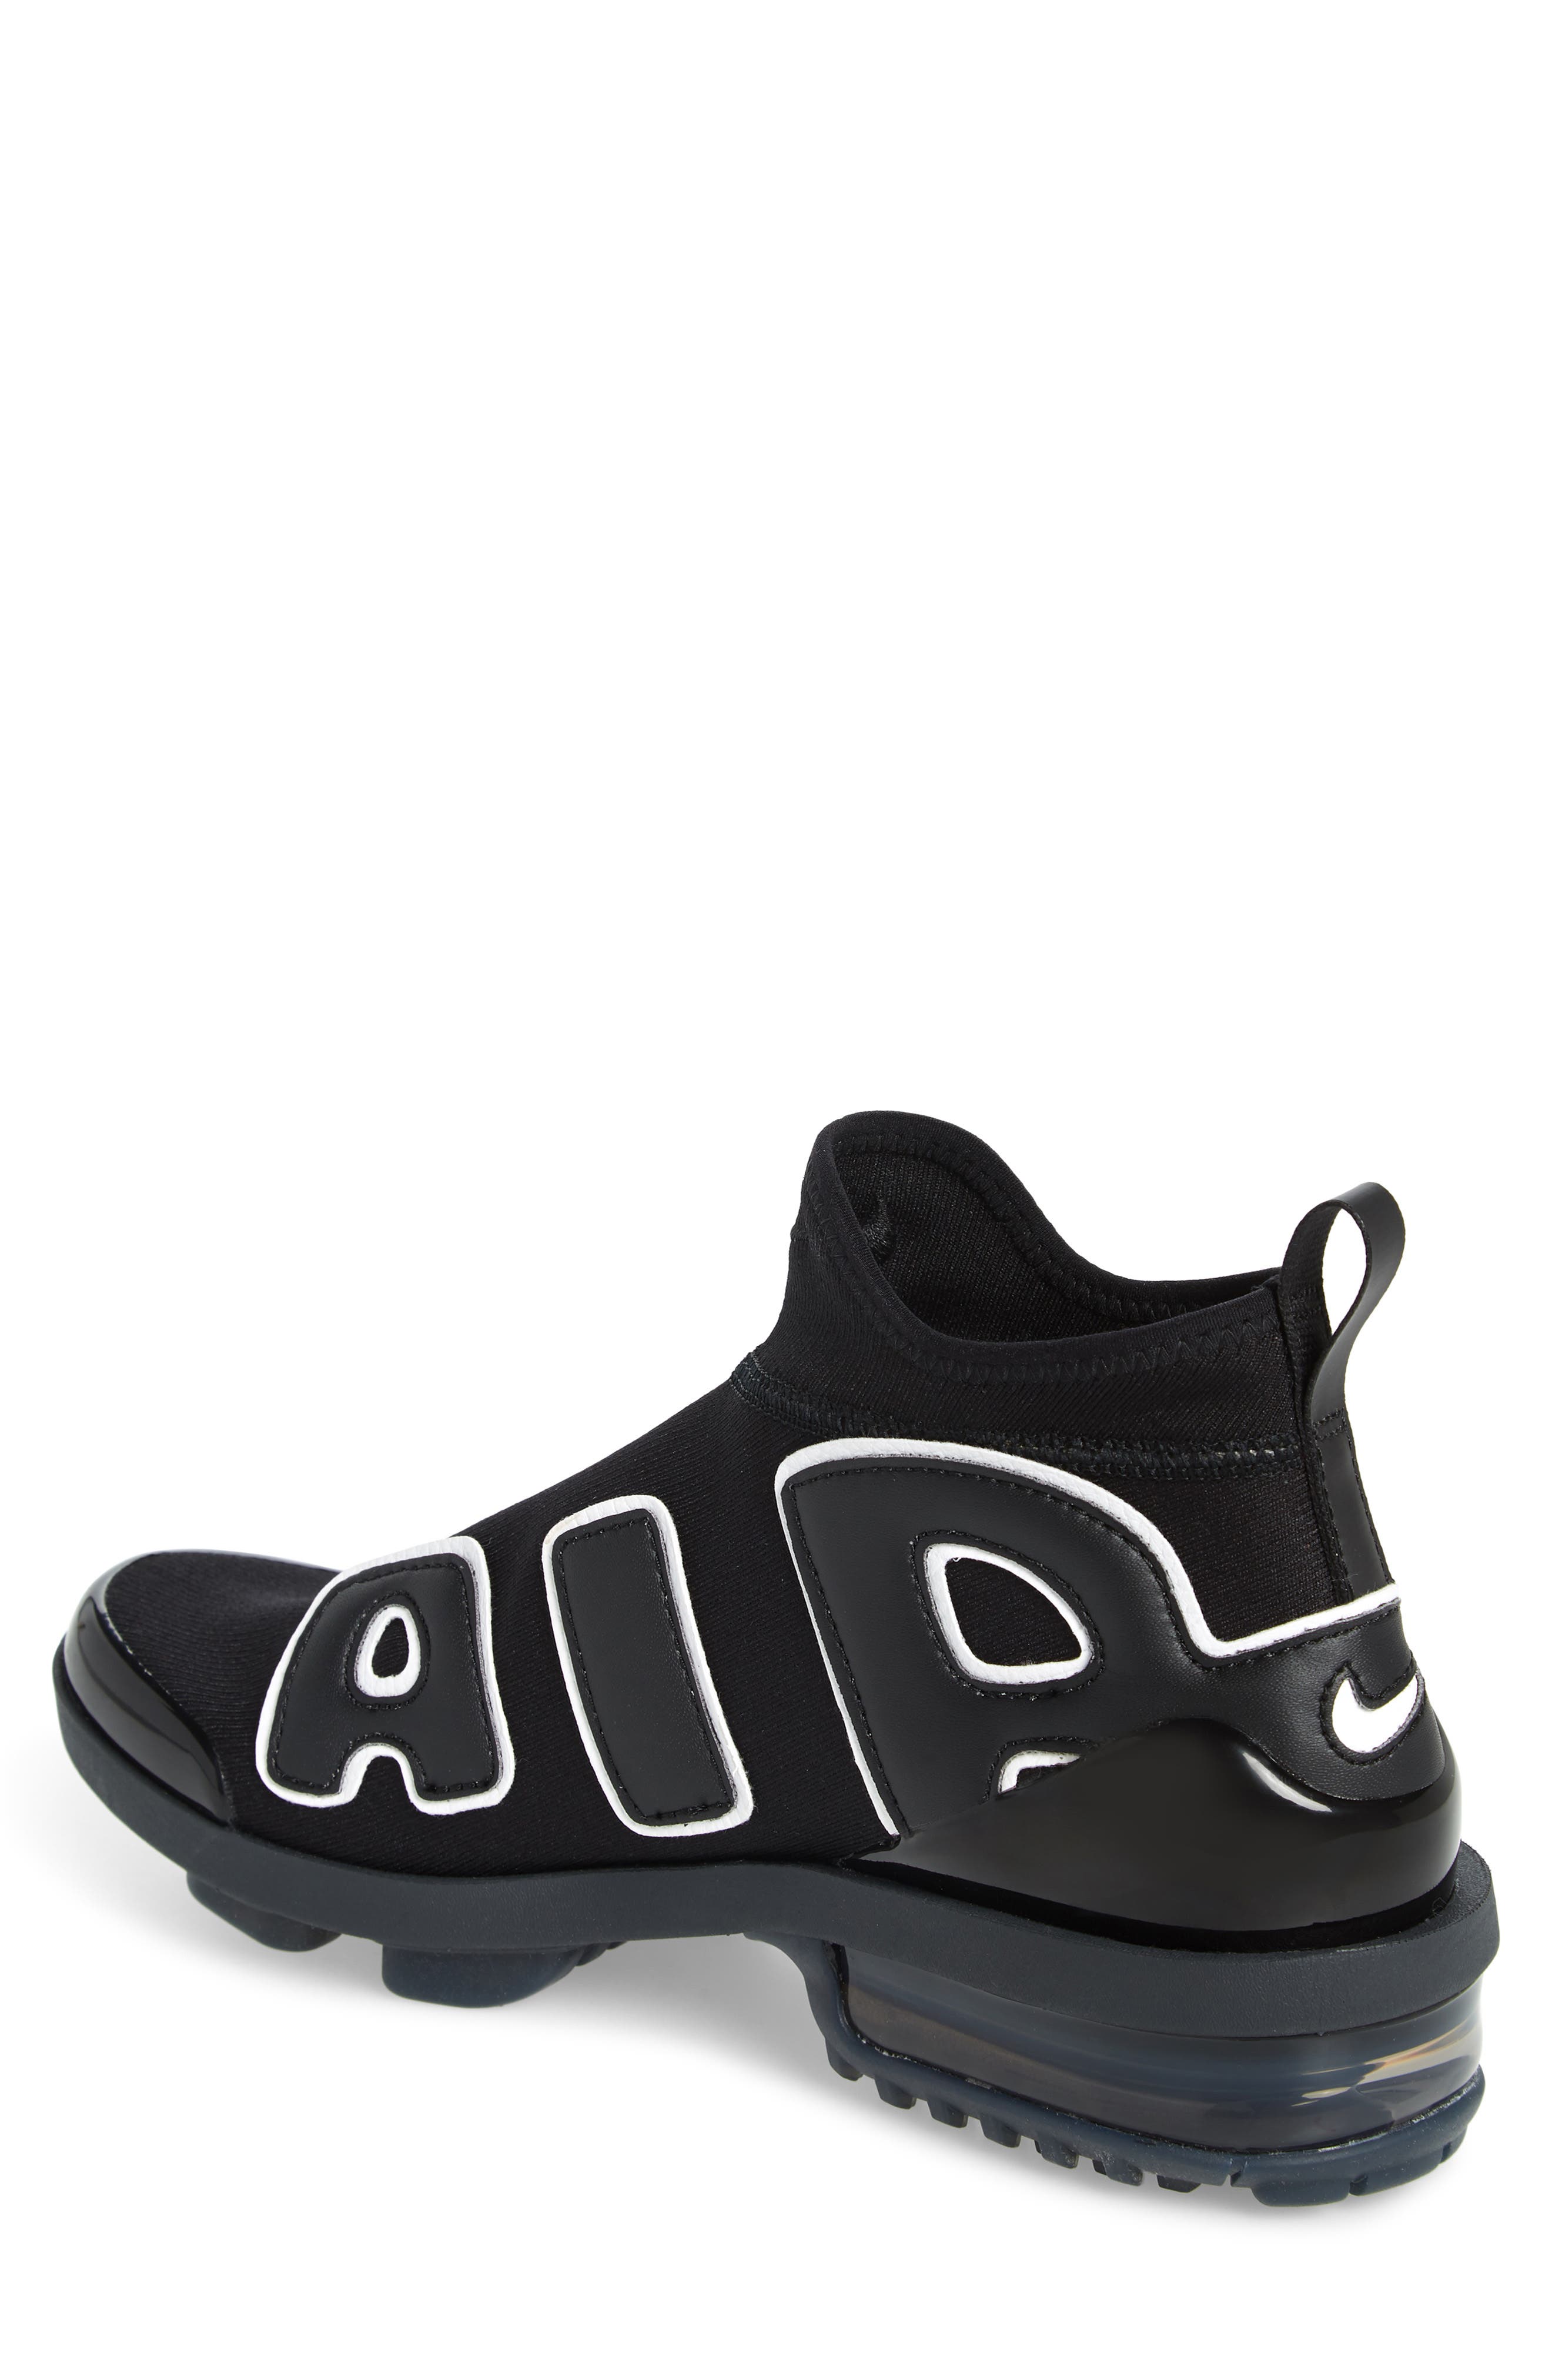 nike airquent mens